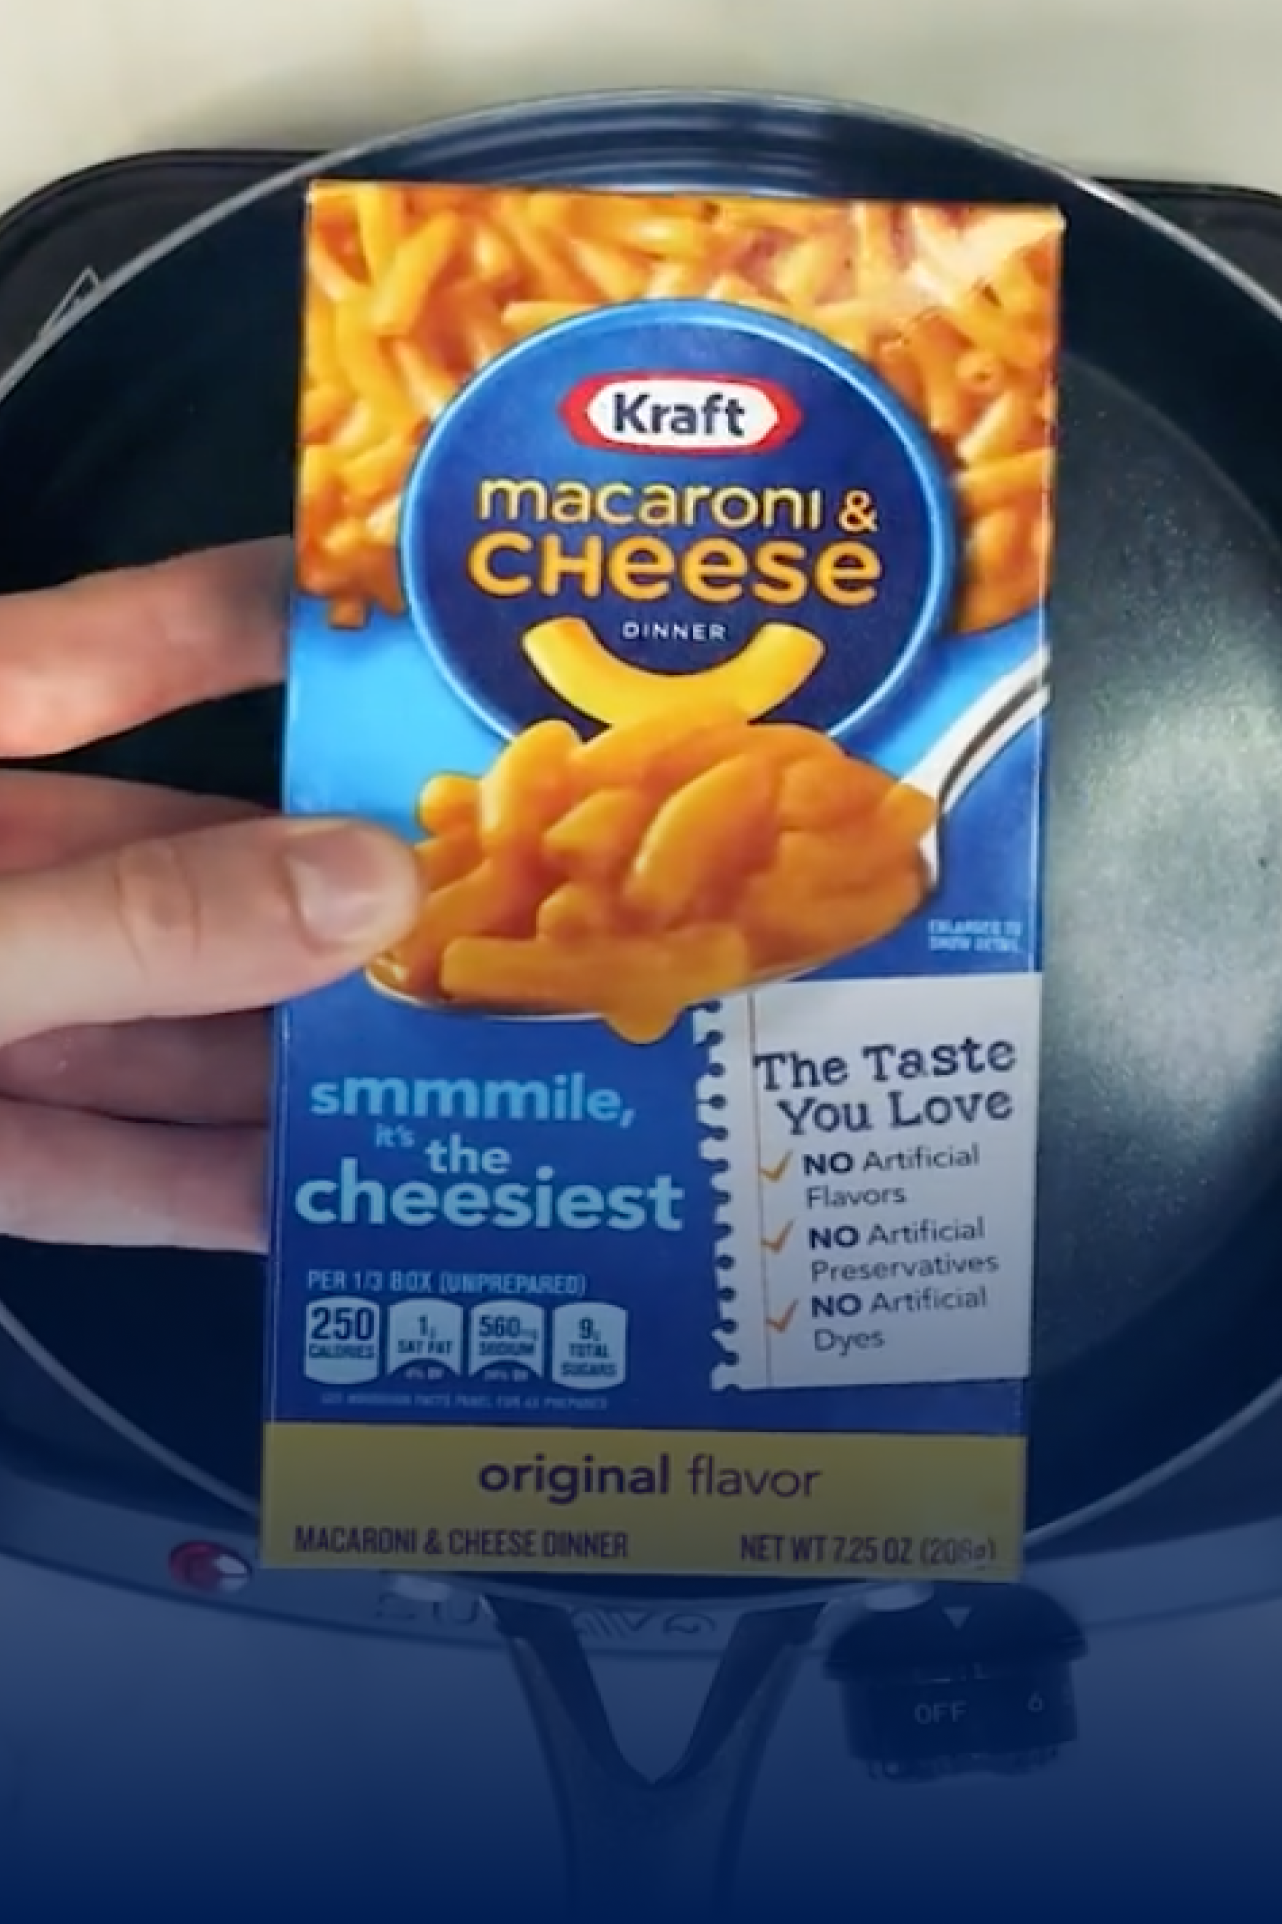 http://cdn.allotta.io/image/upload/v1670438612/dxp-images/kmc/Home%20Page/or-CreativeContentFeed/kraft-mac-cheese-recipe-Cooking-Hack-frying-pan_re7yvt.png